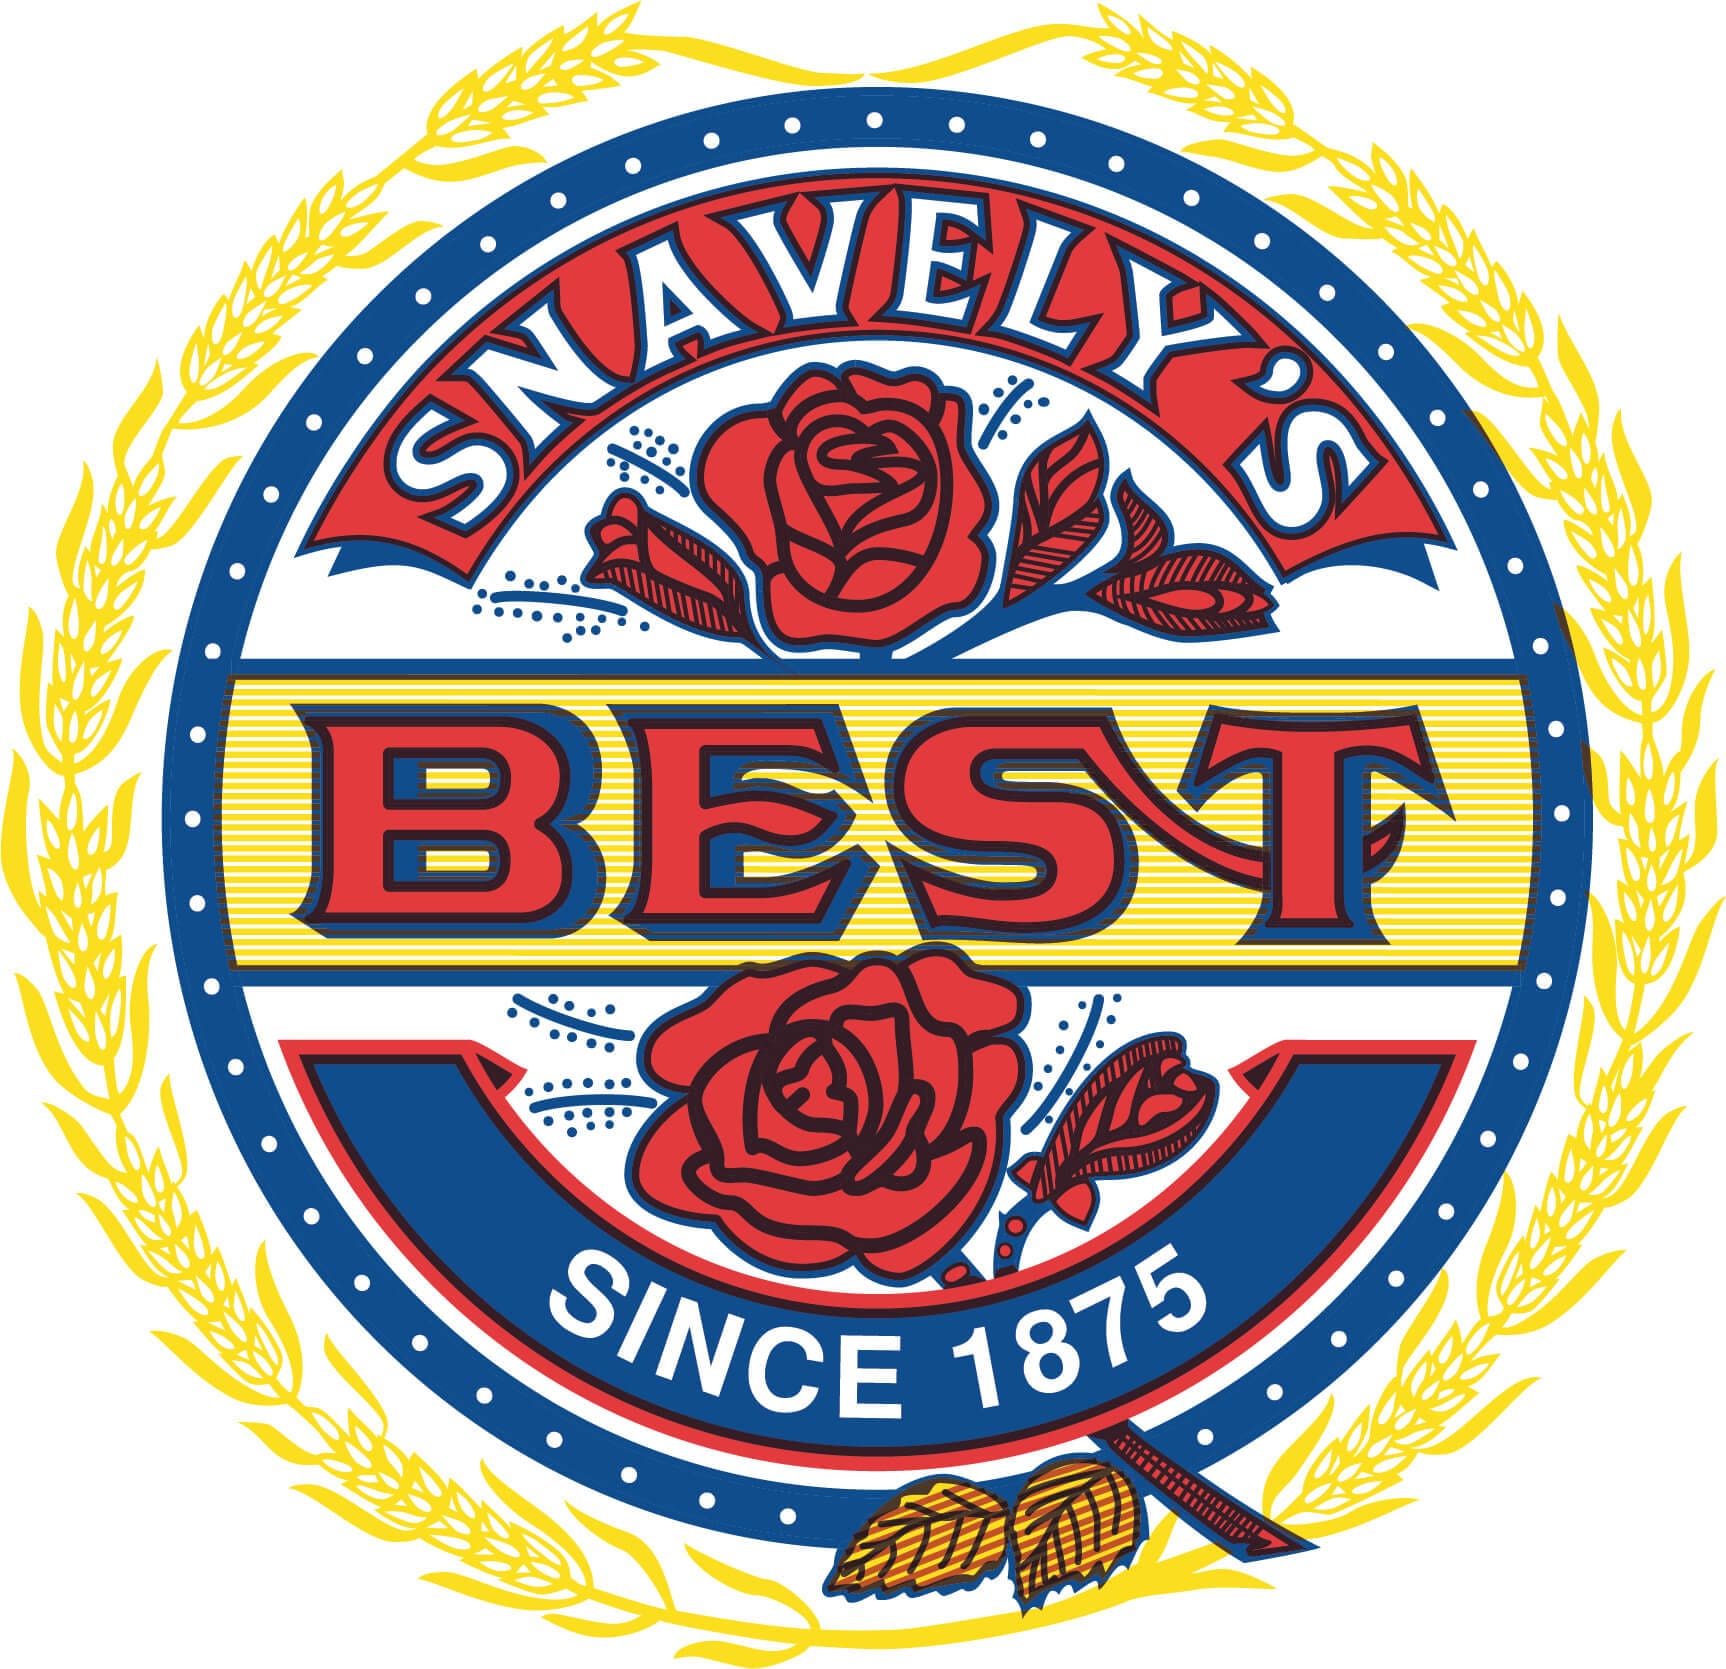 Image for Snavely’s Mill, Inc.